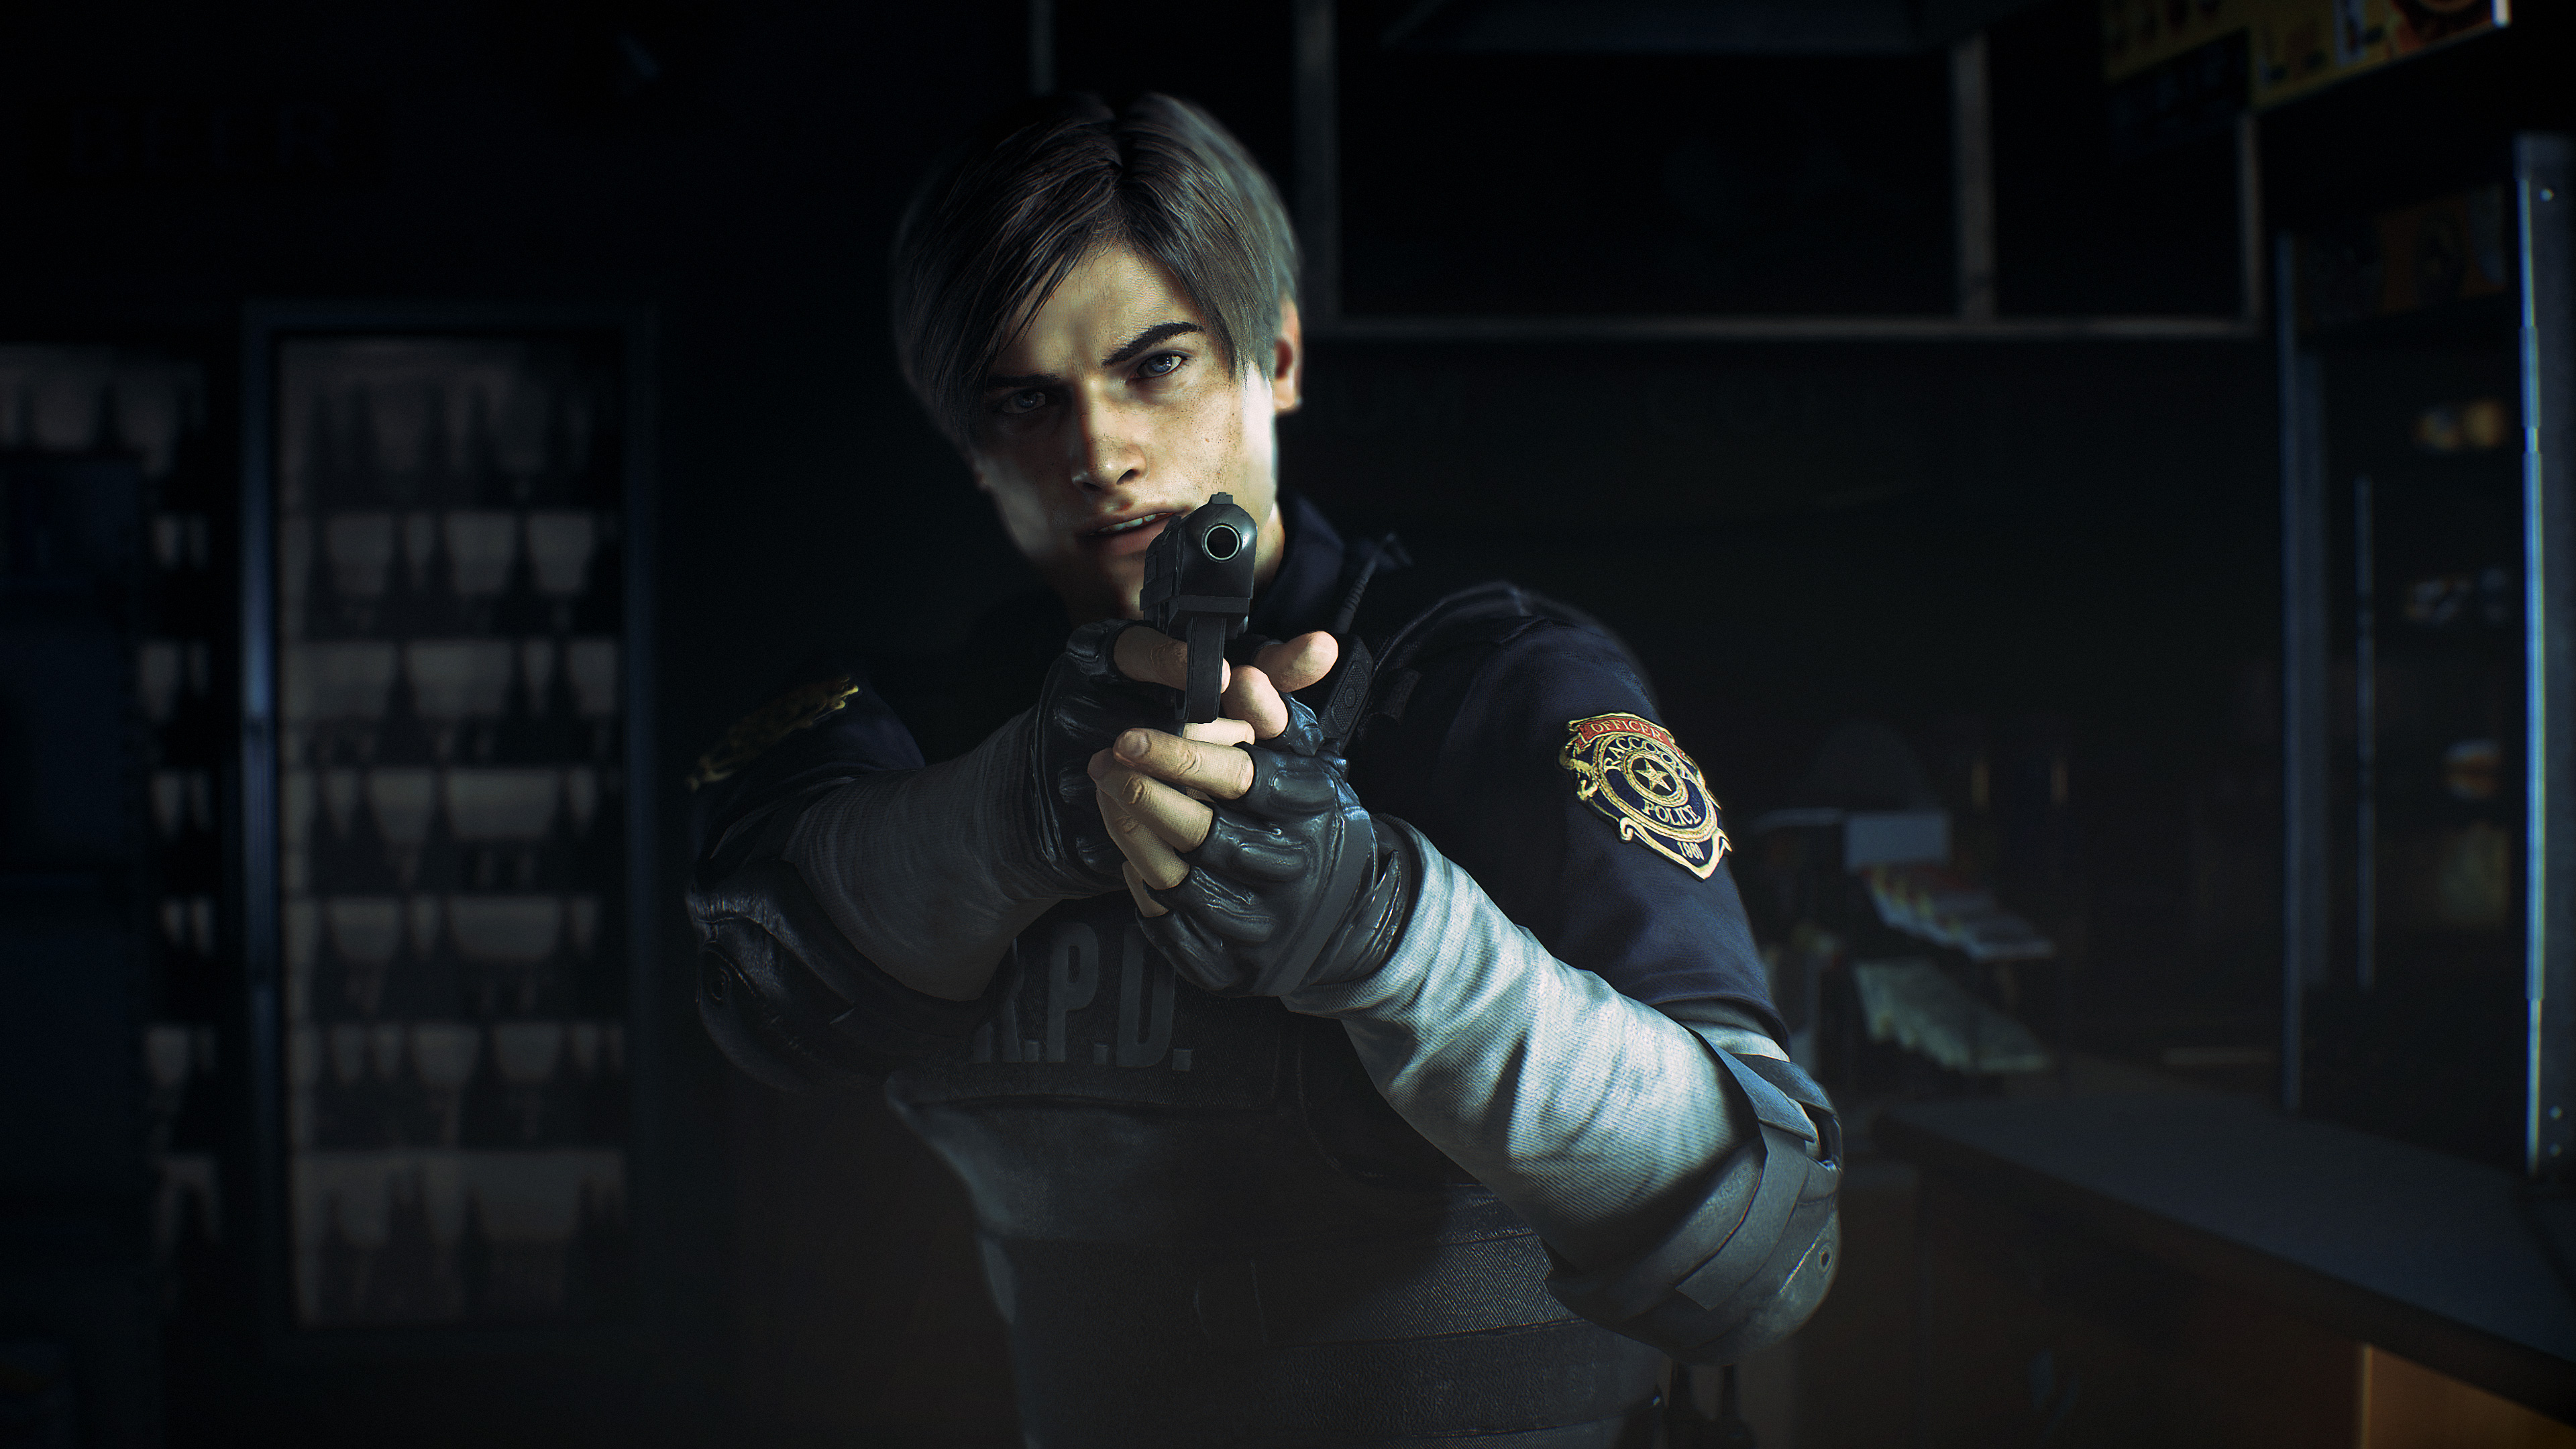 Leon Kennedy In Resident Evil 2 2019 4k, HD Games, 4k Wallpapers, Images,  Backgrounds, Photos and Pictures